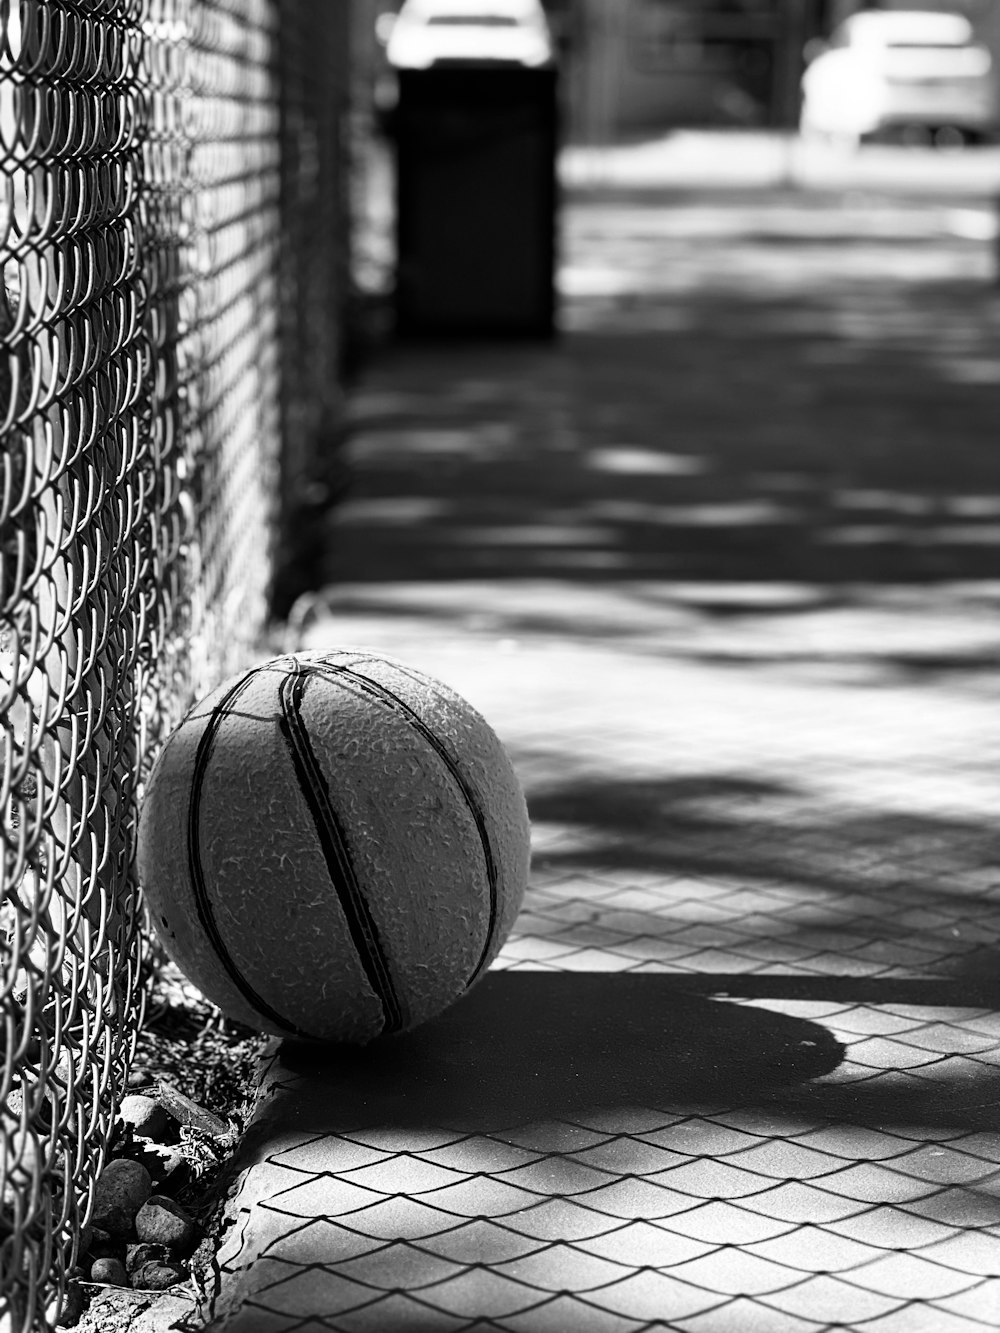 a basketball sitting on the ground next to a fence